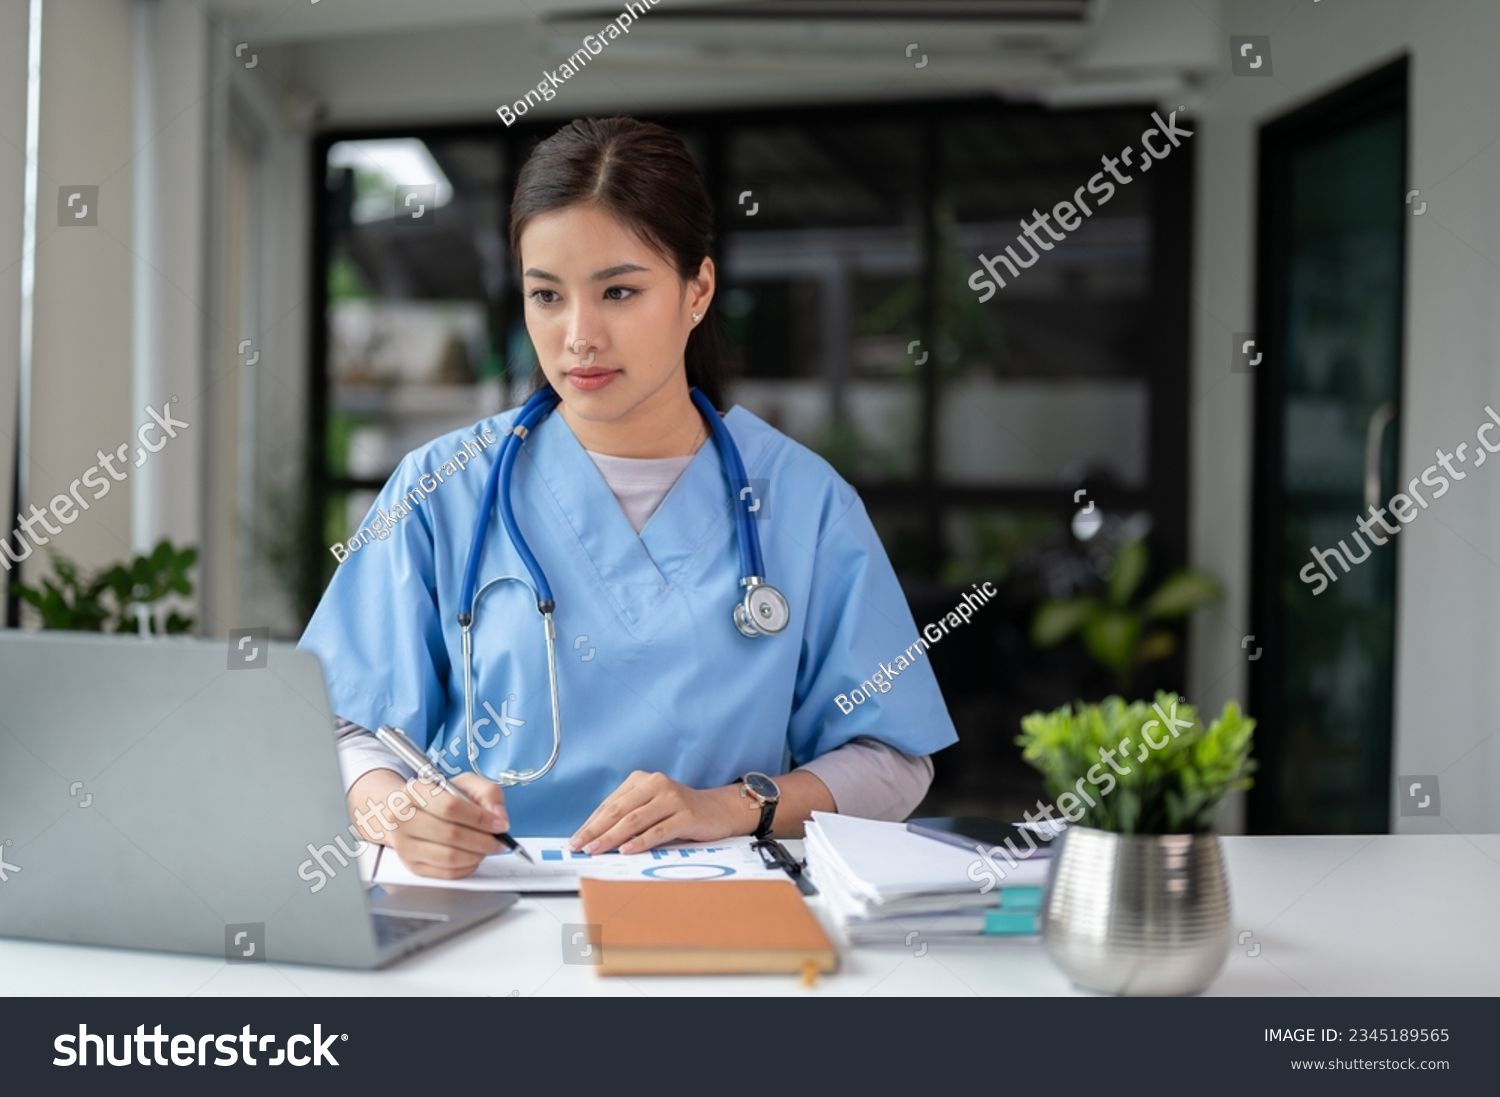 A professional and focused Asian female doctor in scrubs is working and reading medical research on her laptop in her office at a hospital. #2345189565